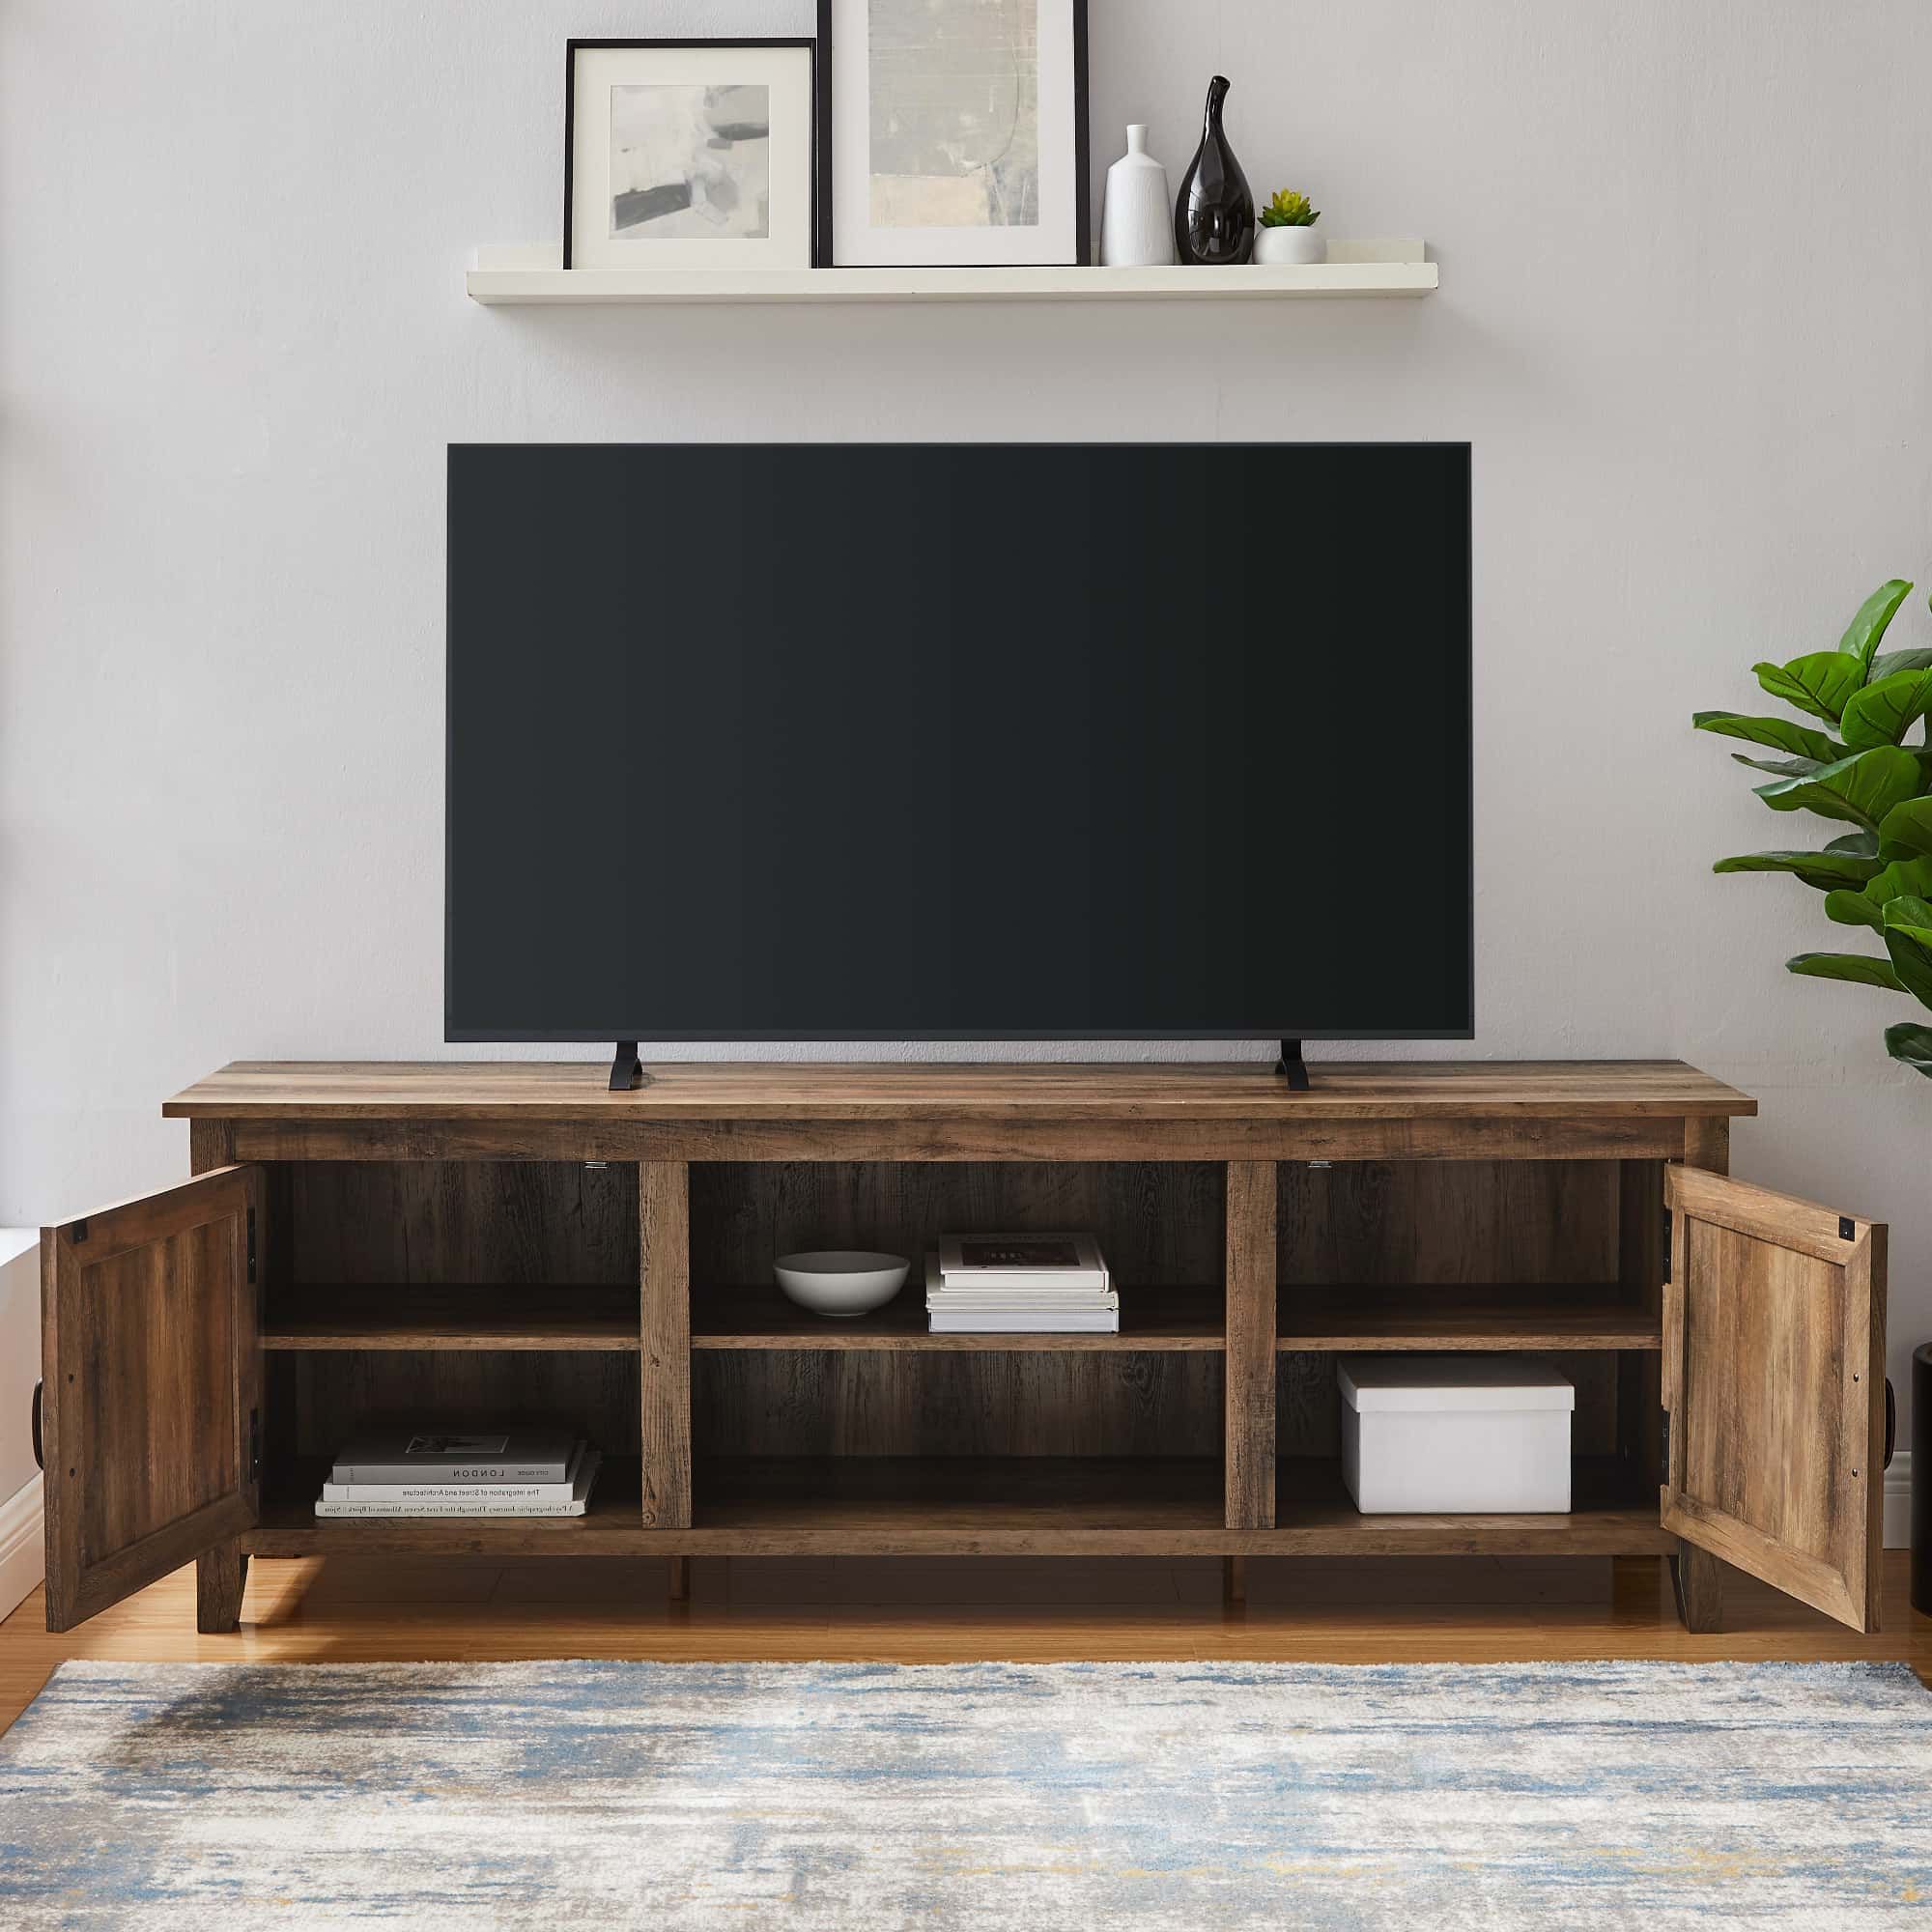 Favorite 70 Inch Modern Farmhouse Wood Tv Stand – Rustic Oakwalker Edison In Farmhouse Tv Stands For 70 Inch Tv (View 4 of 15)